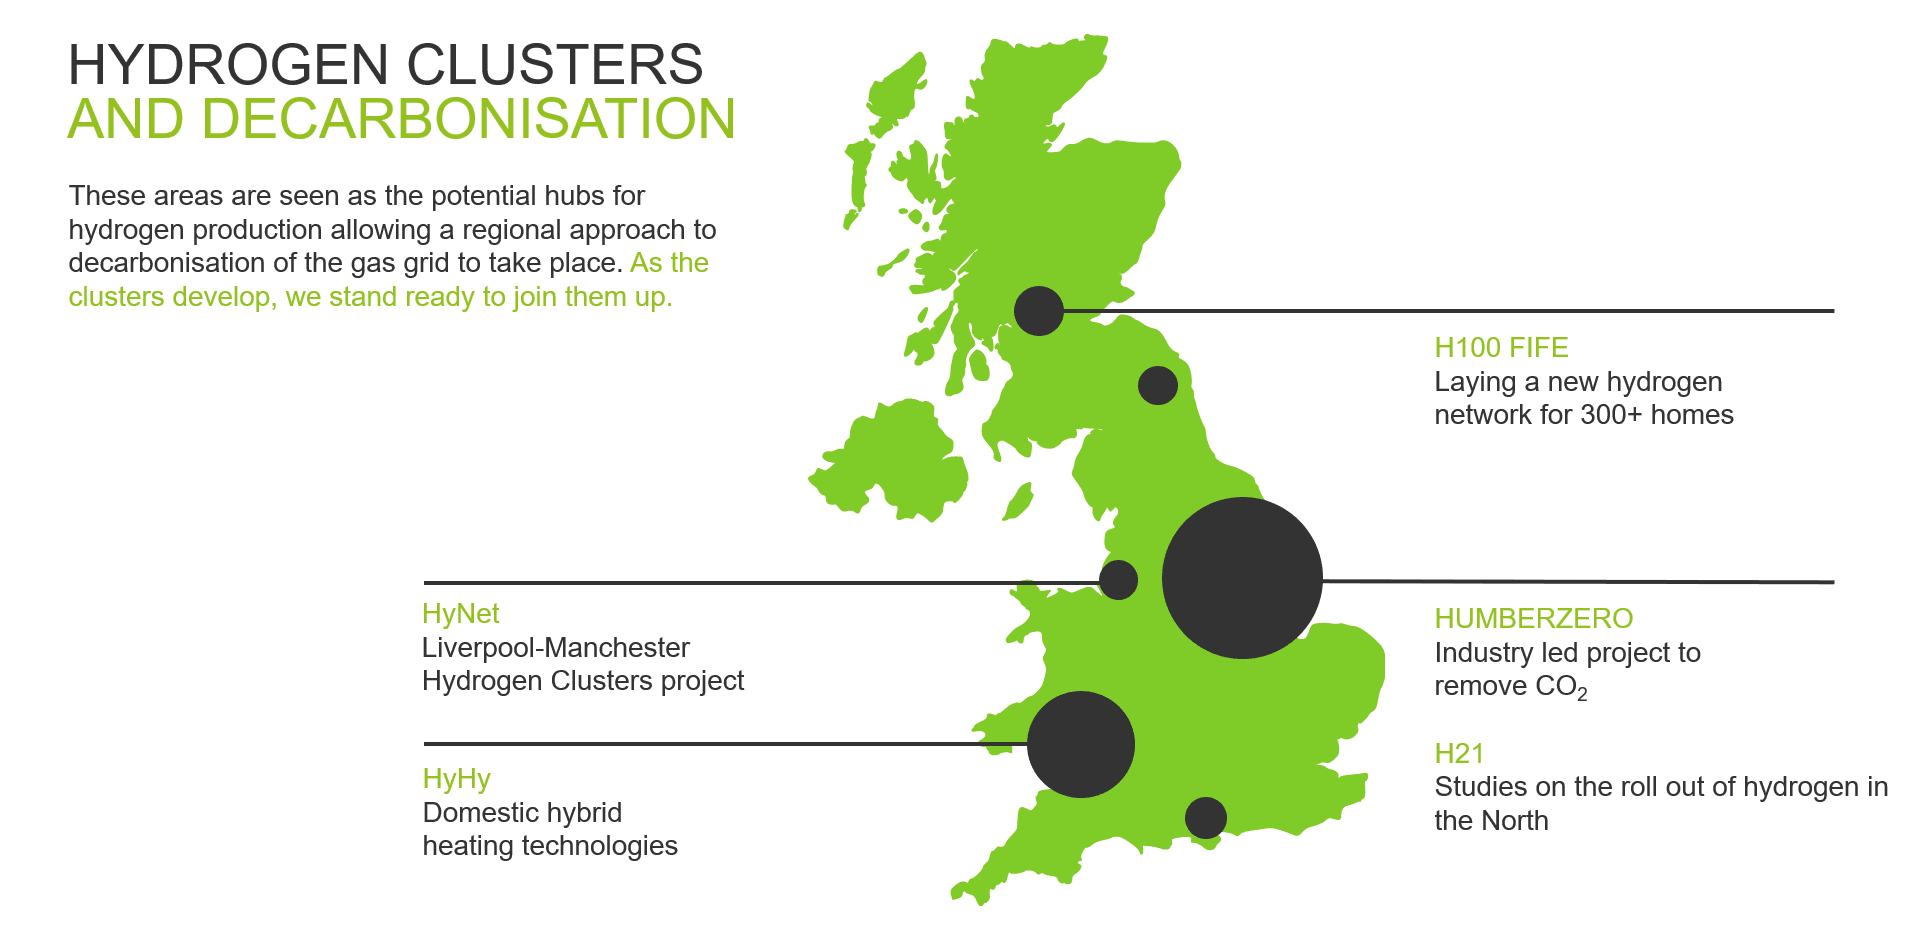 The potential hydrogen hubs in the UK